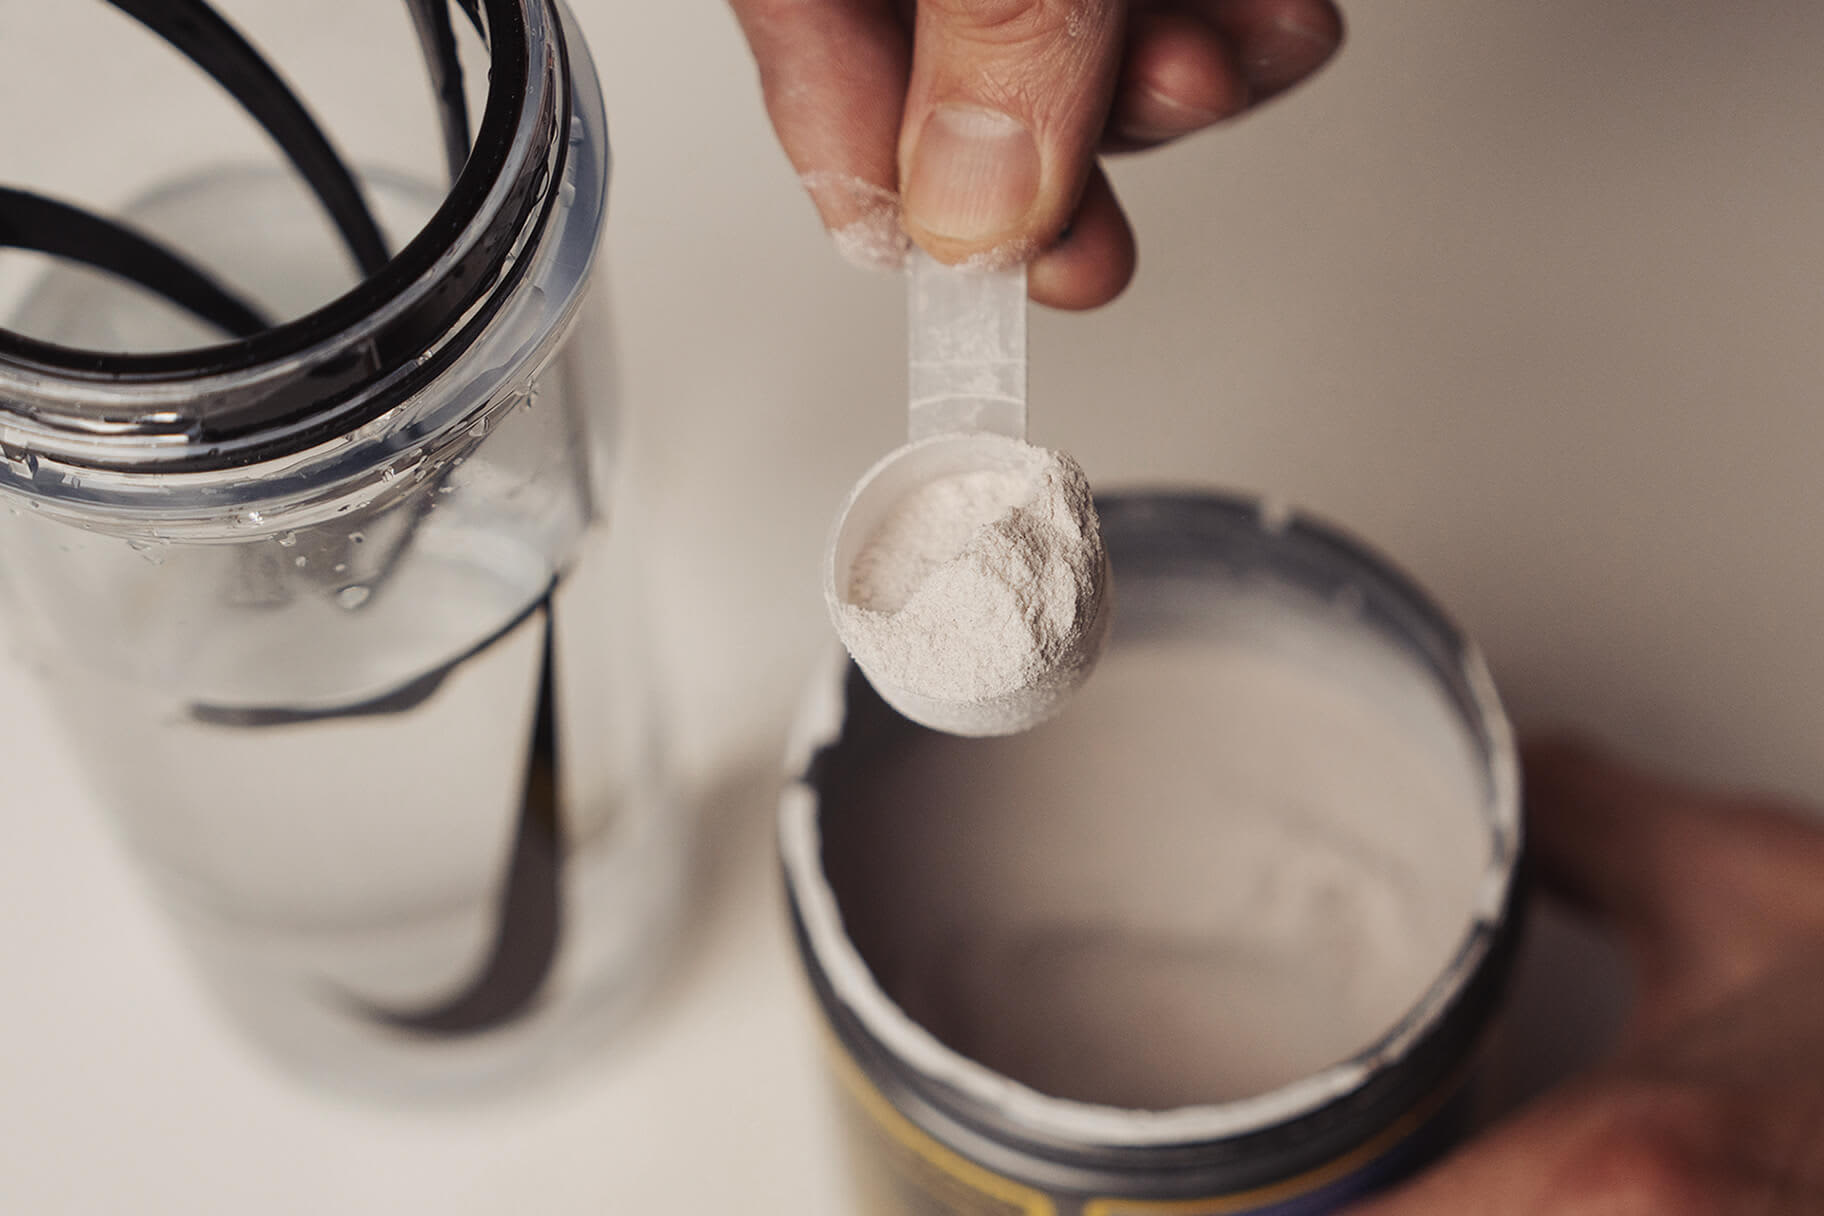 Is Dry Scooping Pre-workout Safe?